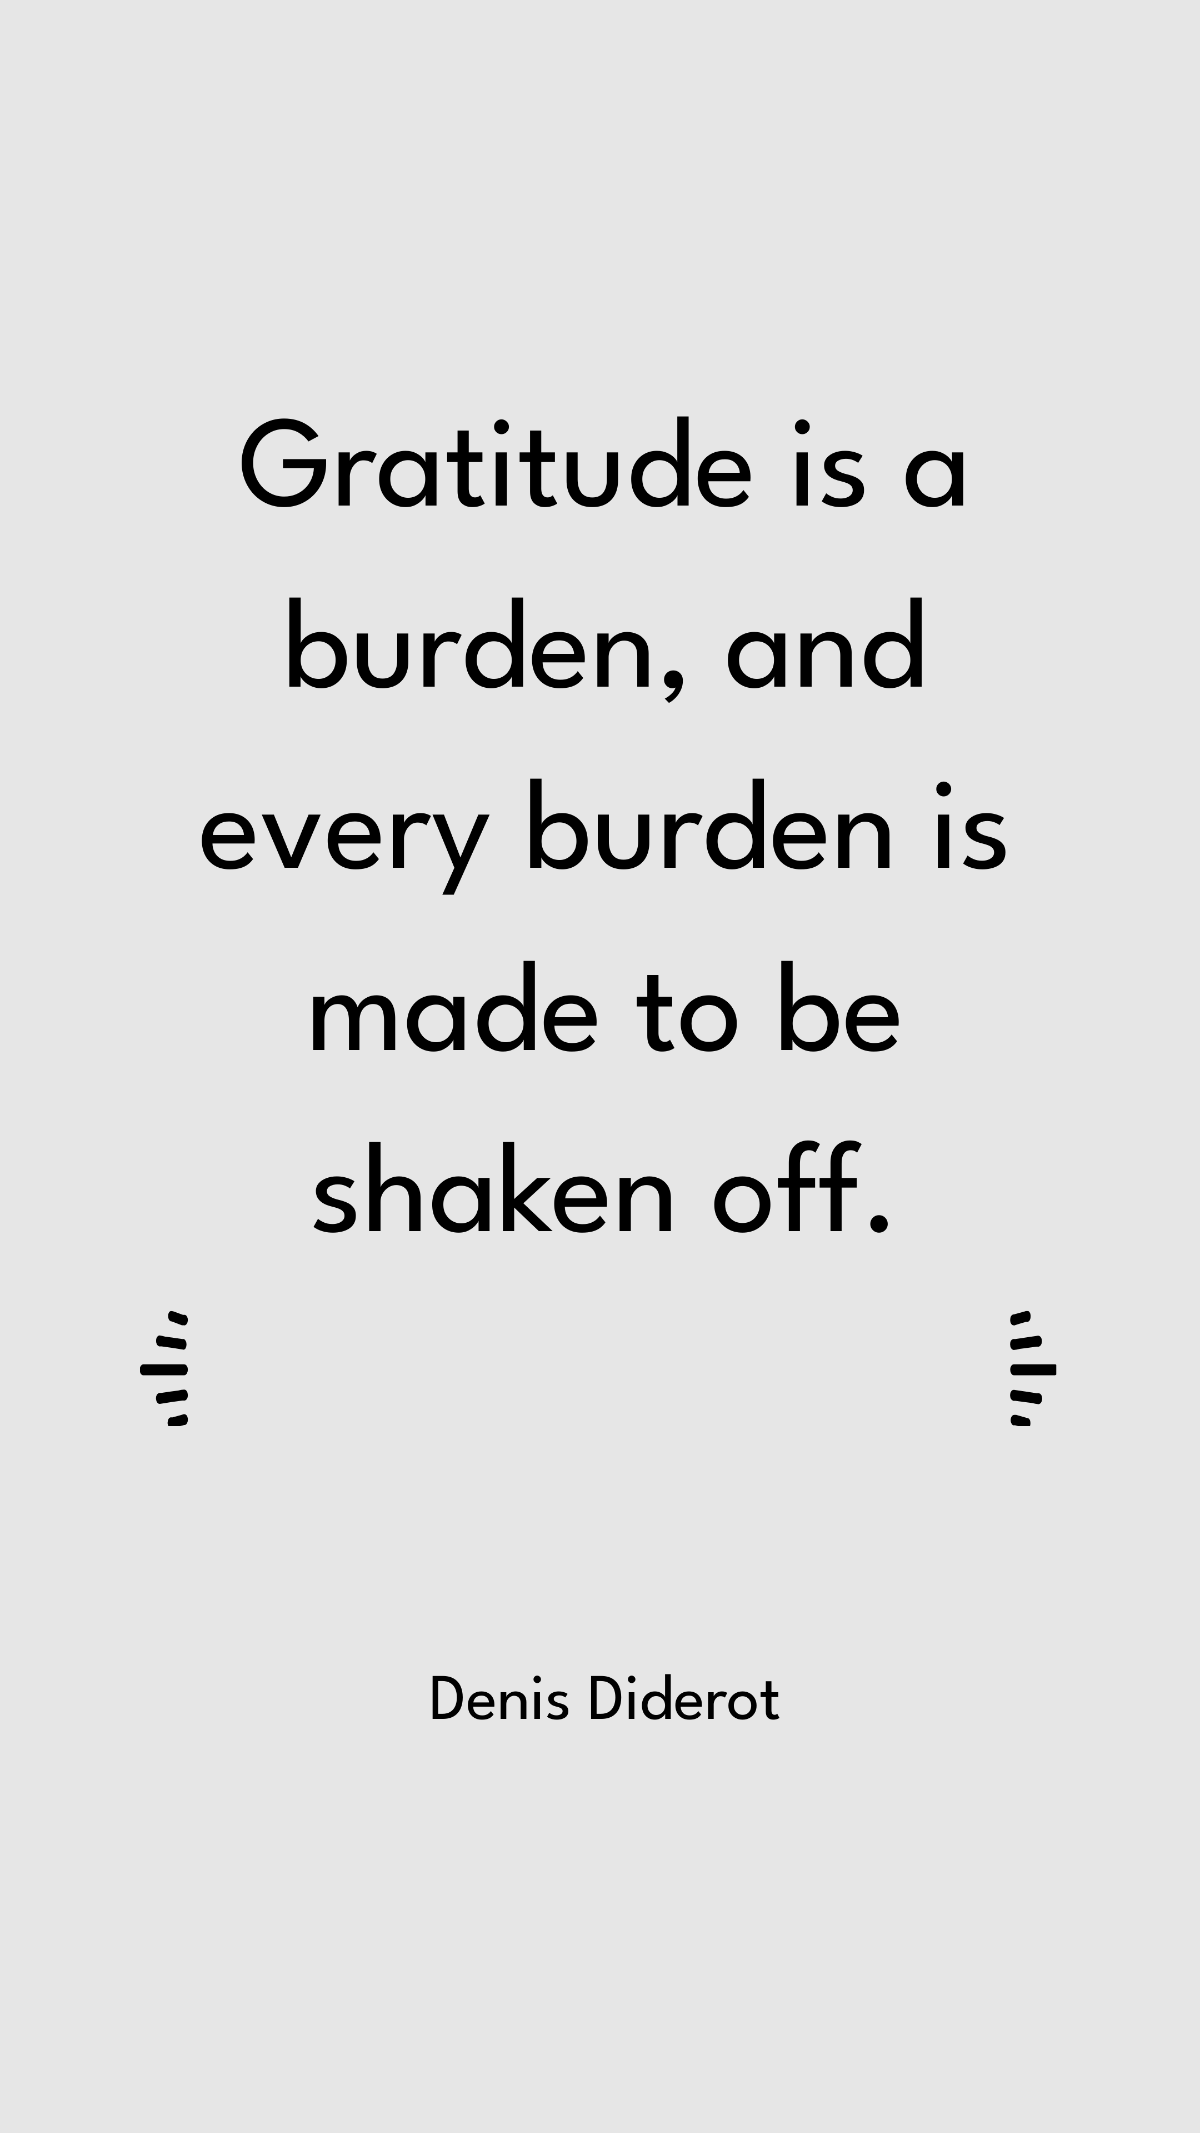 Denis Diderot - Gratitude is a burden, and every burden is made to be shaken off. Template